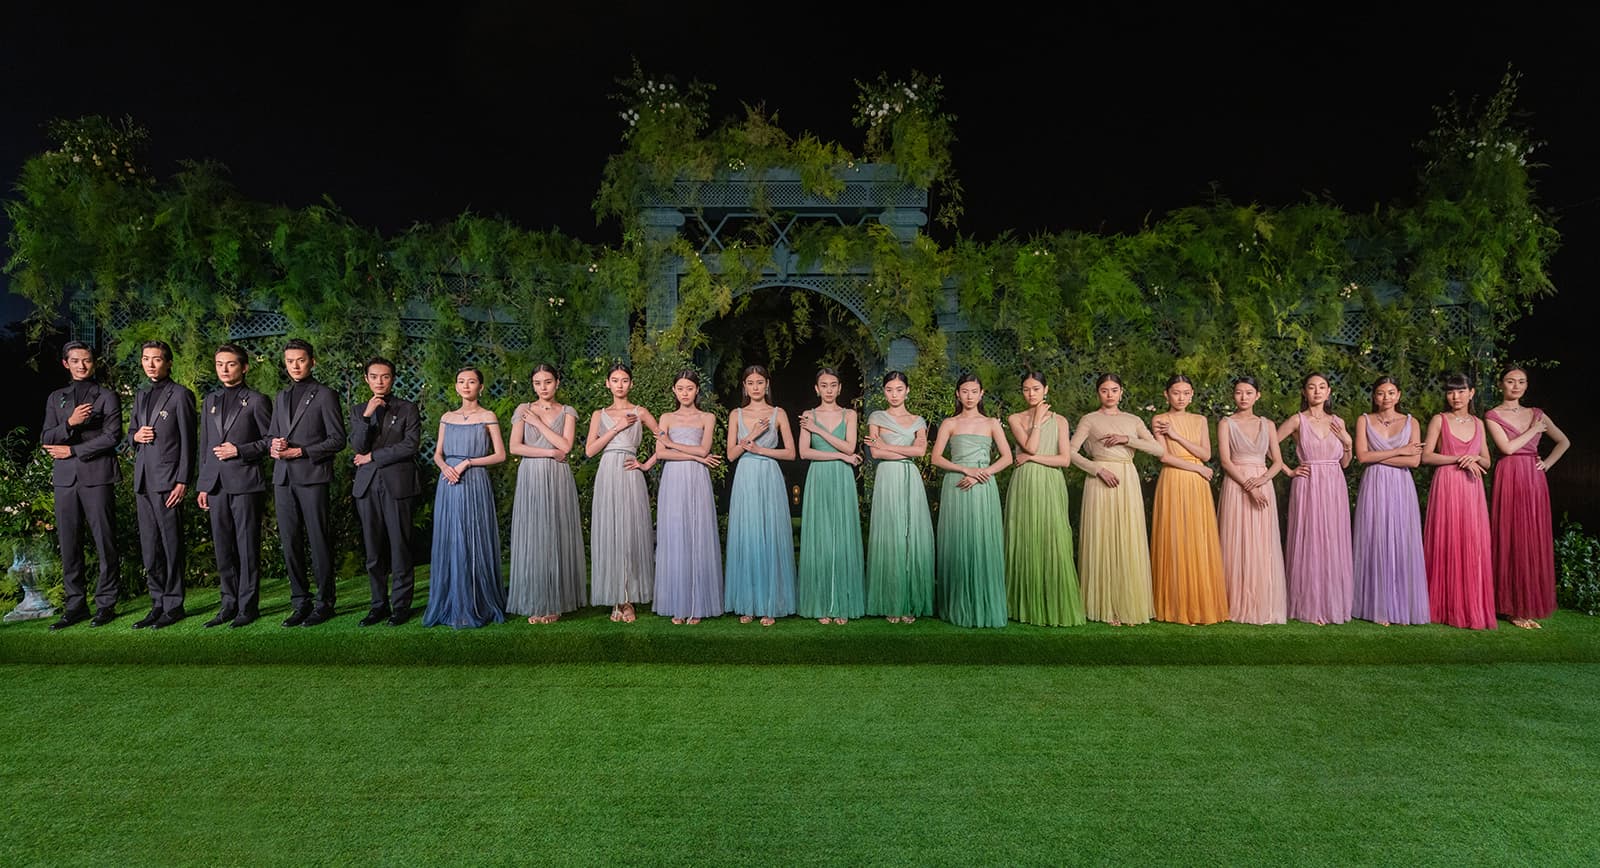 At the launch of the Tie & DIOR high jewellery collection in Shanghai, models wore Maria Grazia Chiuri’s colourful dresses for Dior, accessorised with magnificent jewels from the collection